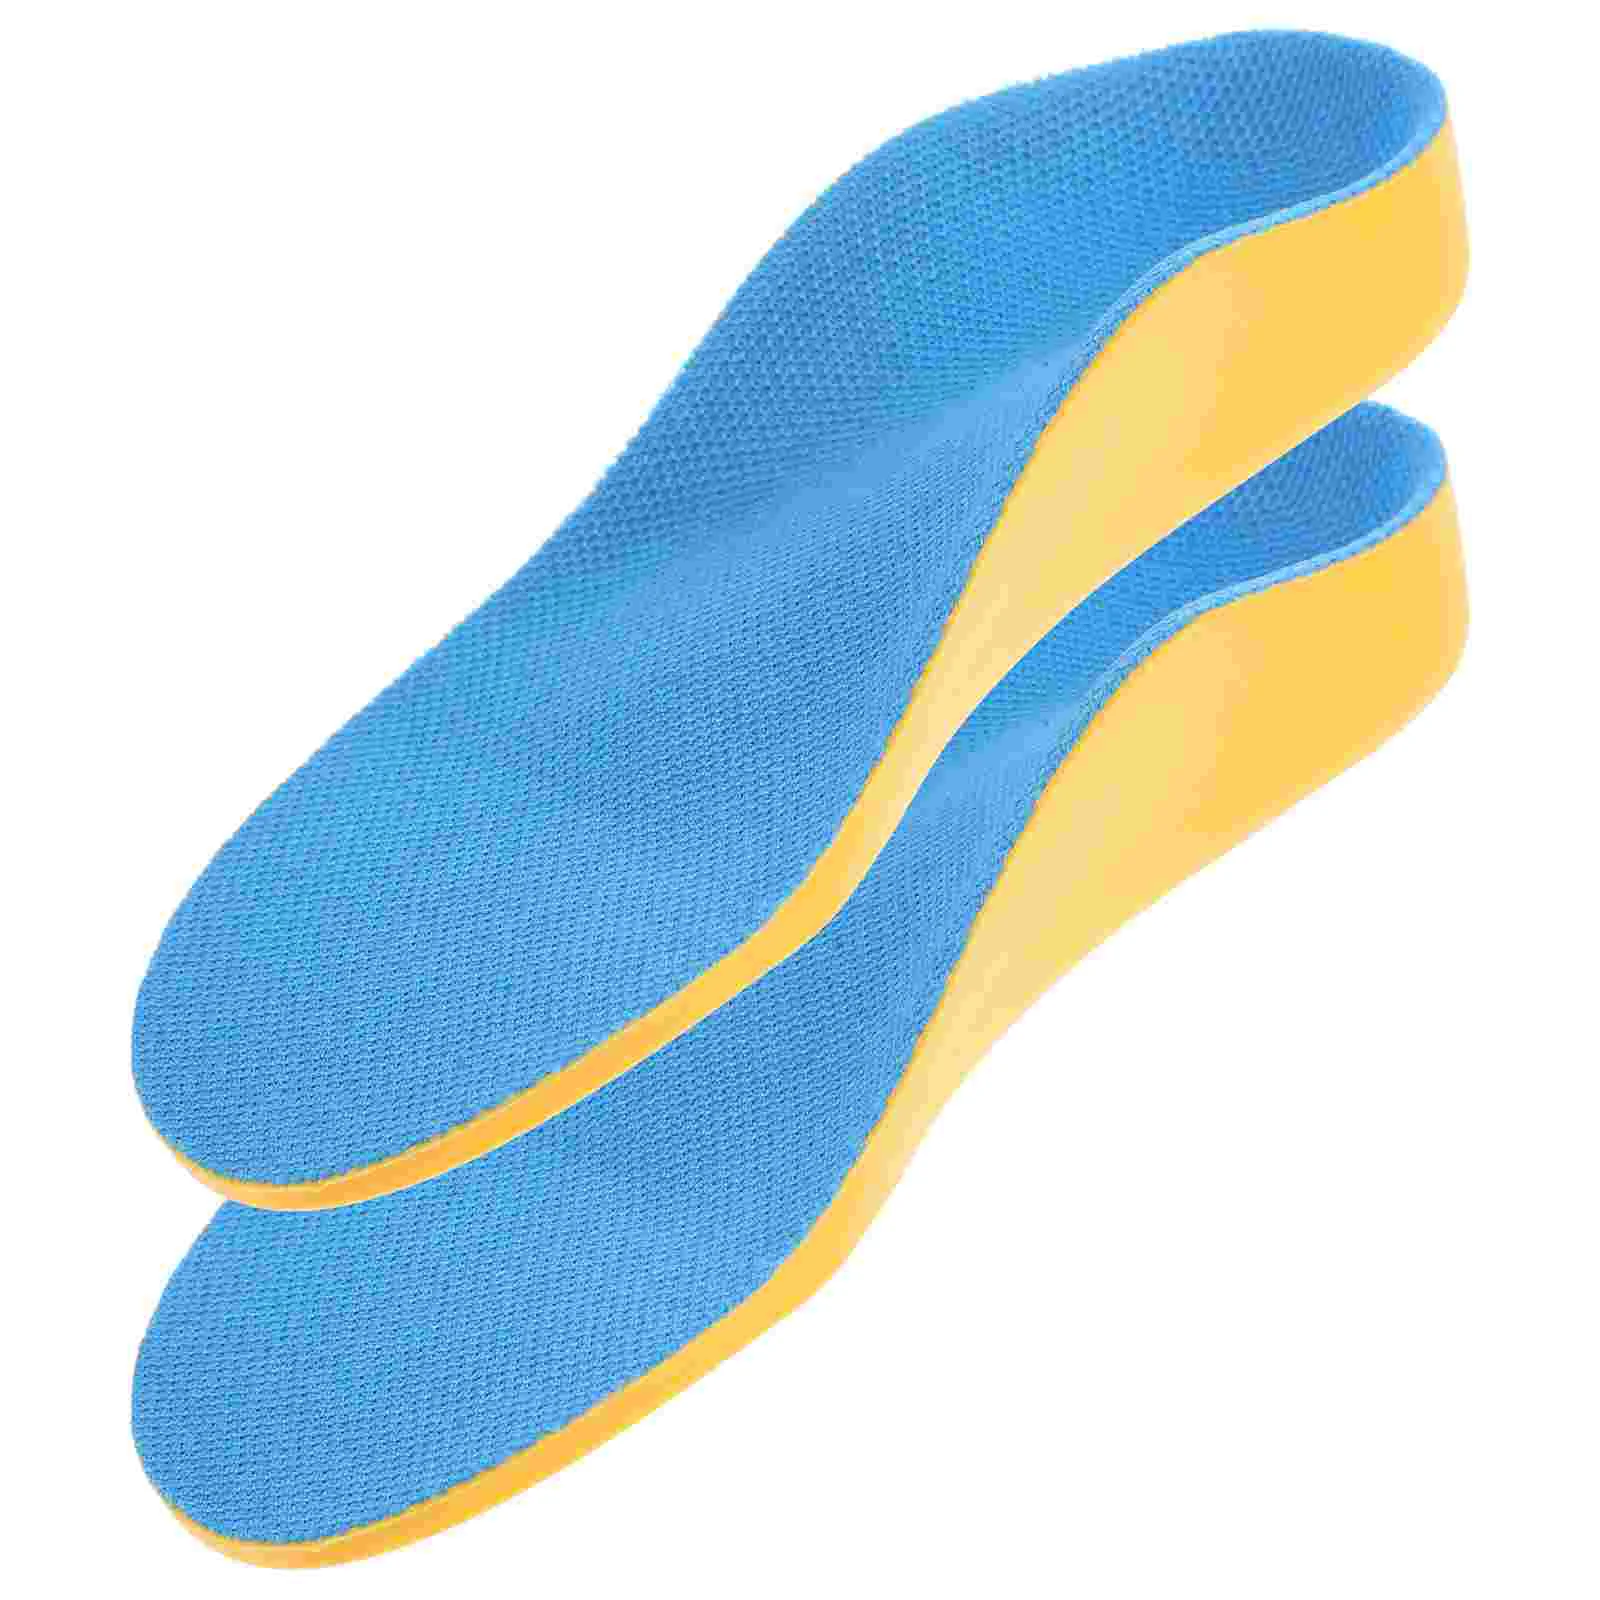 

Children Flatfoot Orthotics Feet Care Insoles Orthopedic Arch Support Cushion Pads